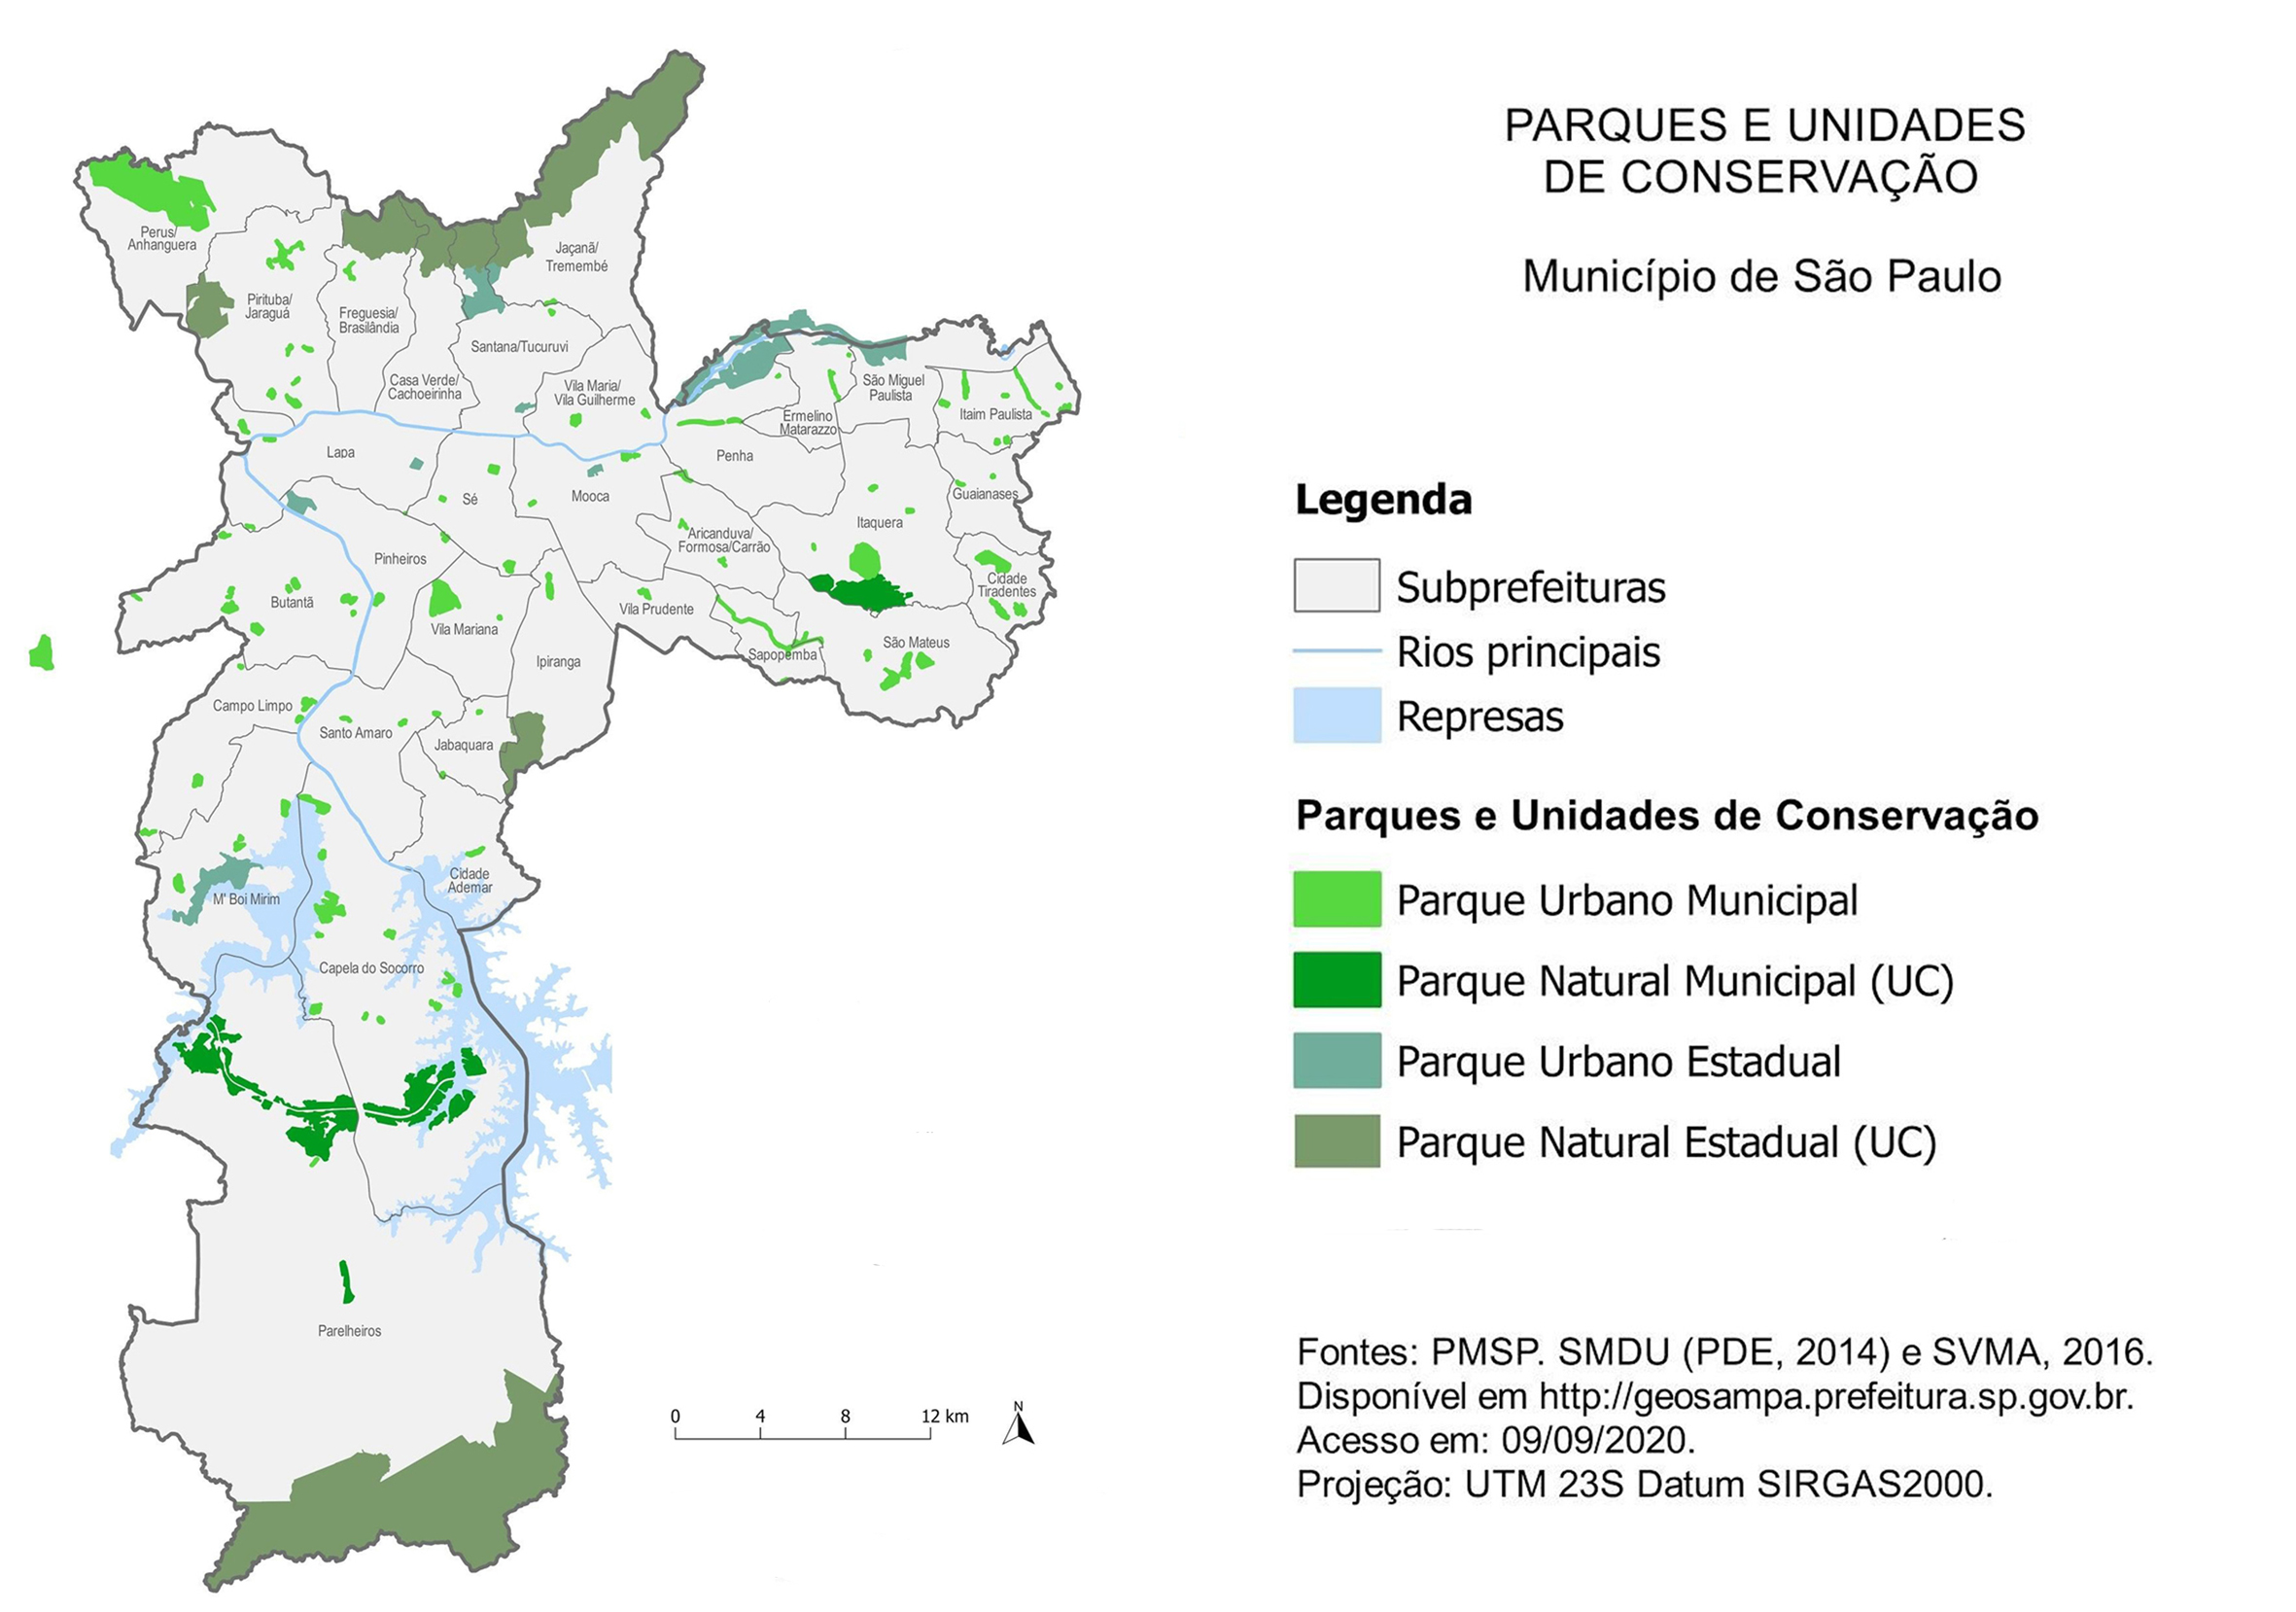 Parks and Conservation Units map